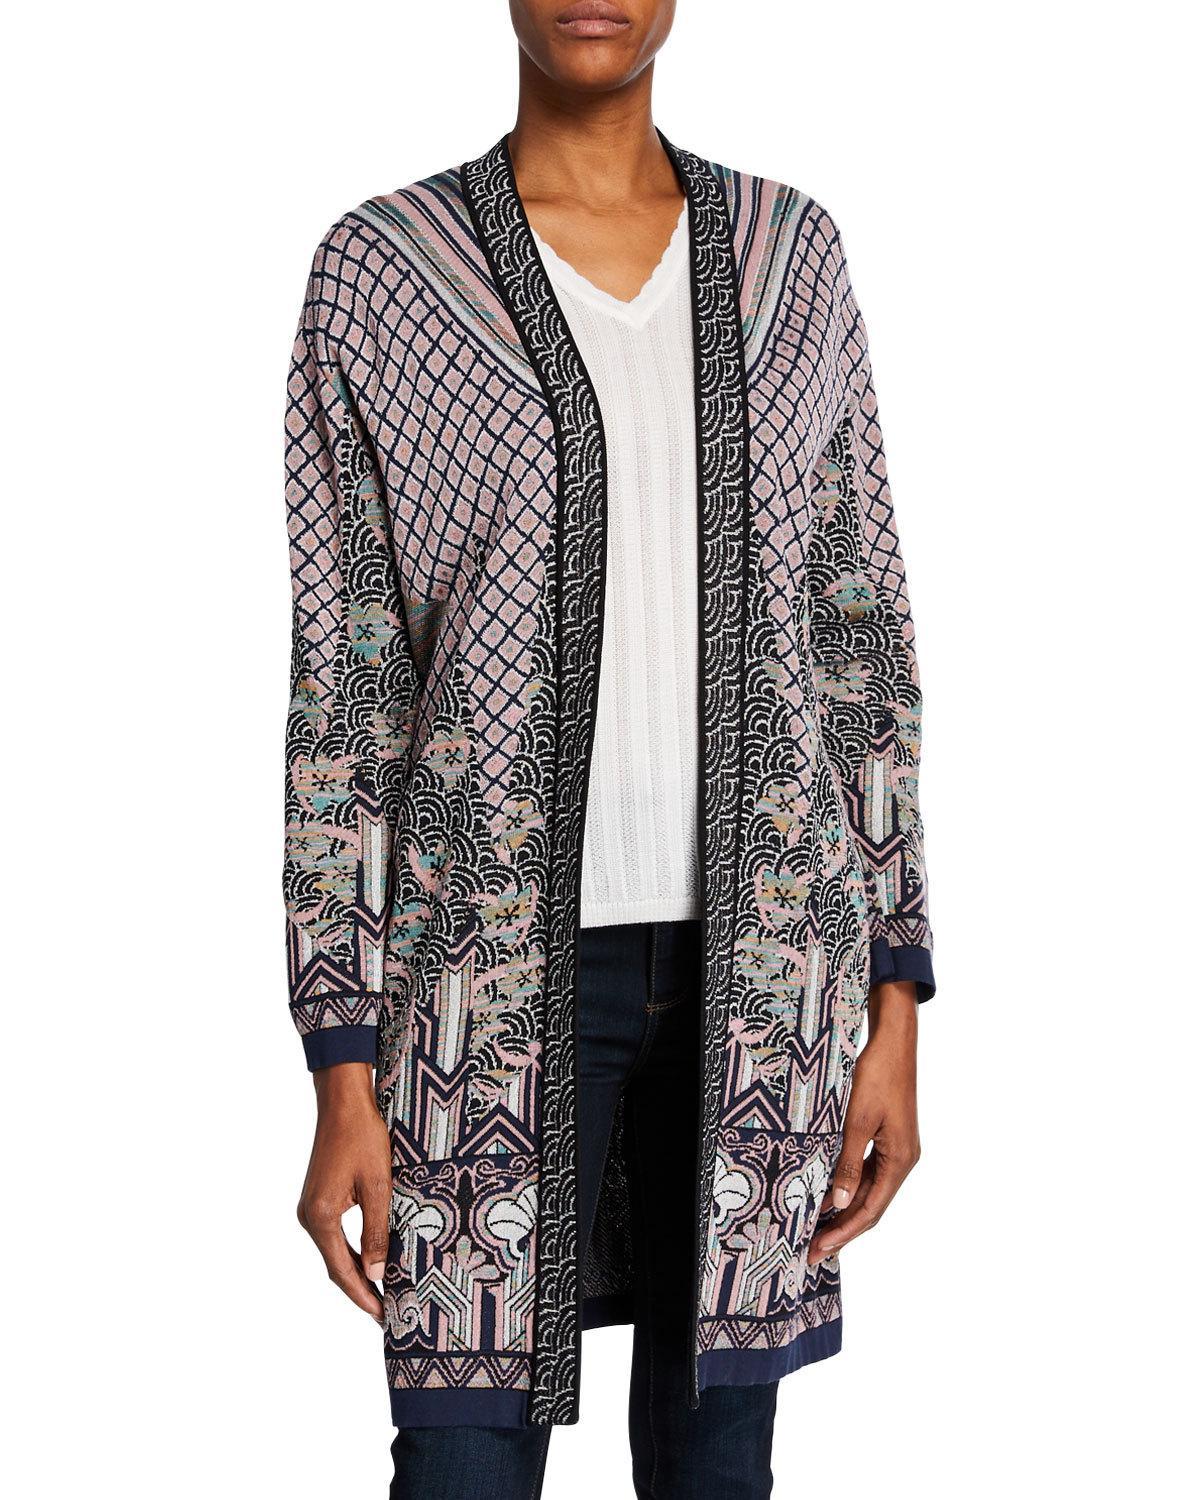 M Missoni Open-front Patterned Jacquard Duster in Black - Lyst